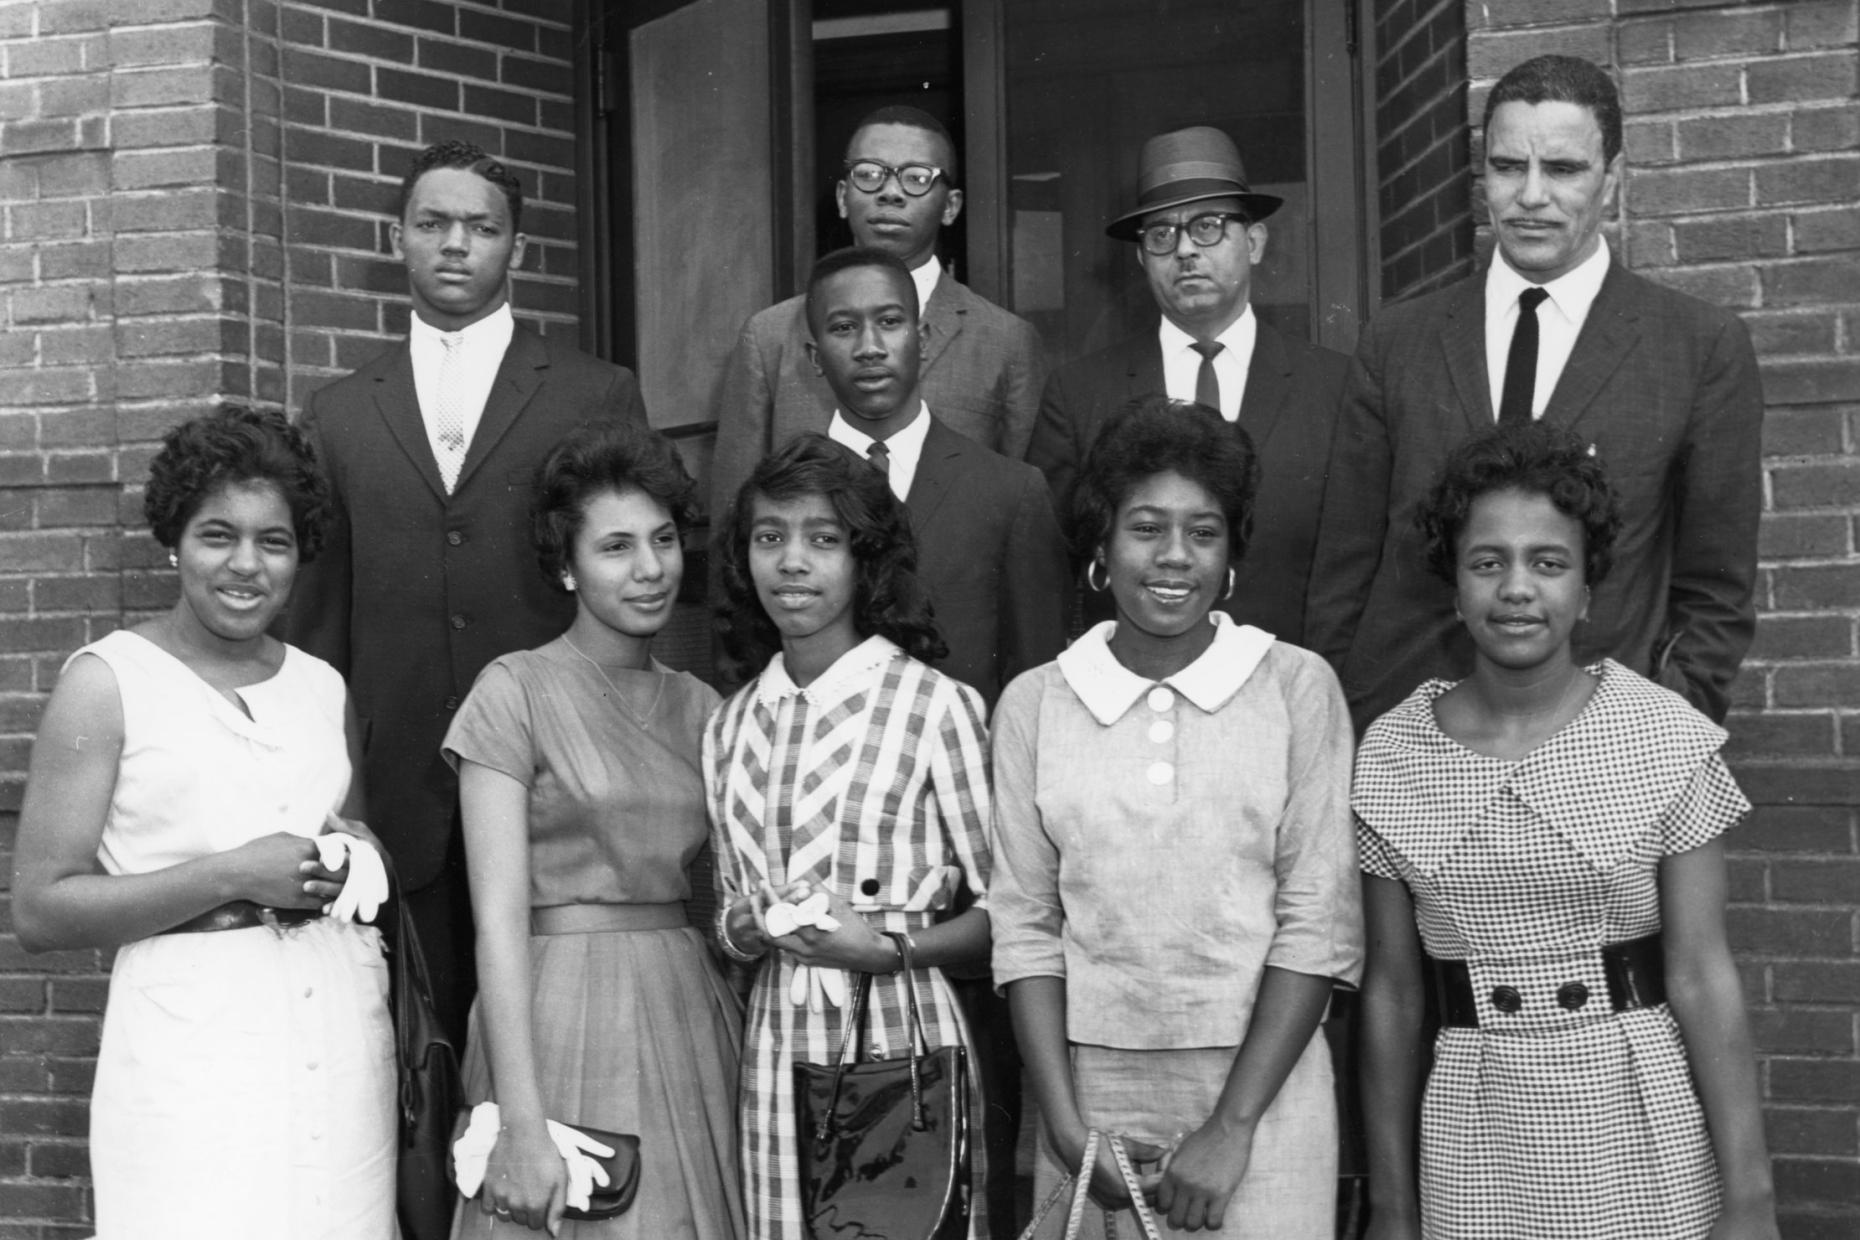 On July 16, 1960, seven students from Sterling High along with college freshman, Jesse Jackson, entered the library and were arrested. This group became known as the Greenville Eight.